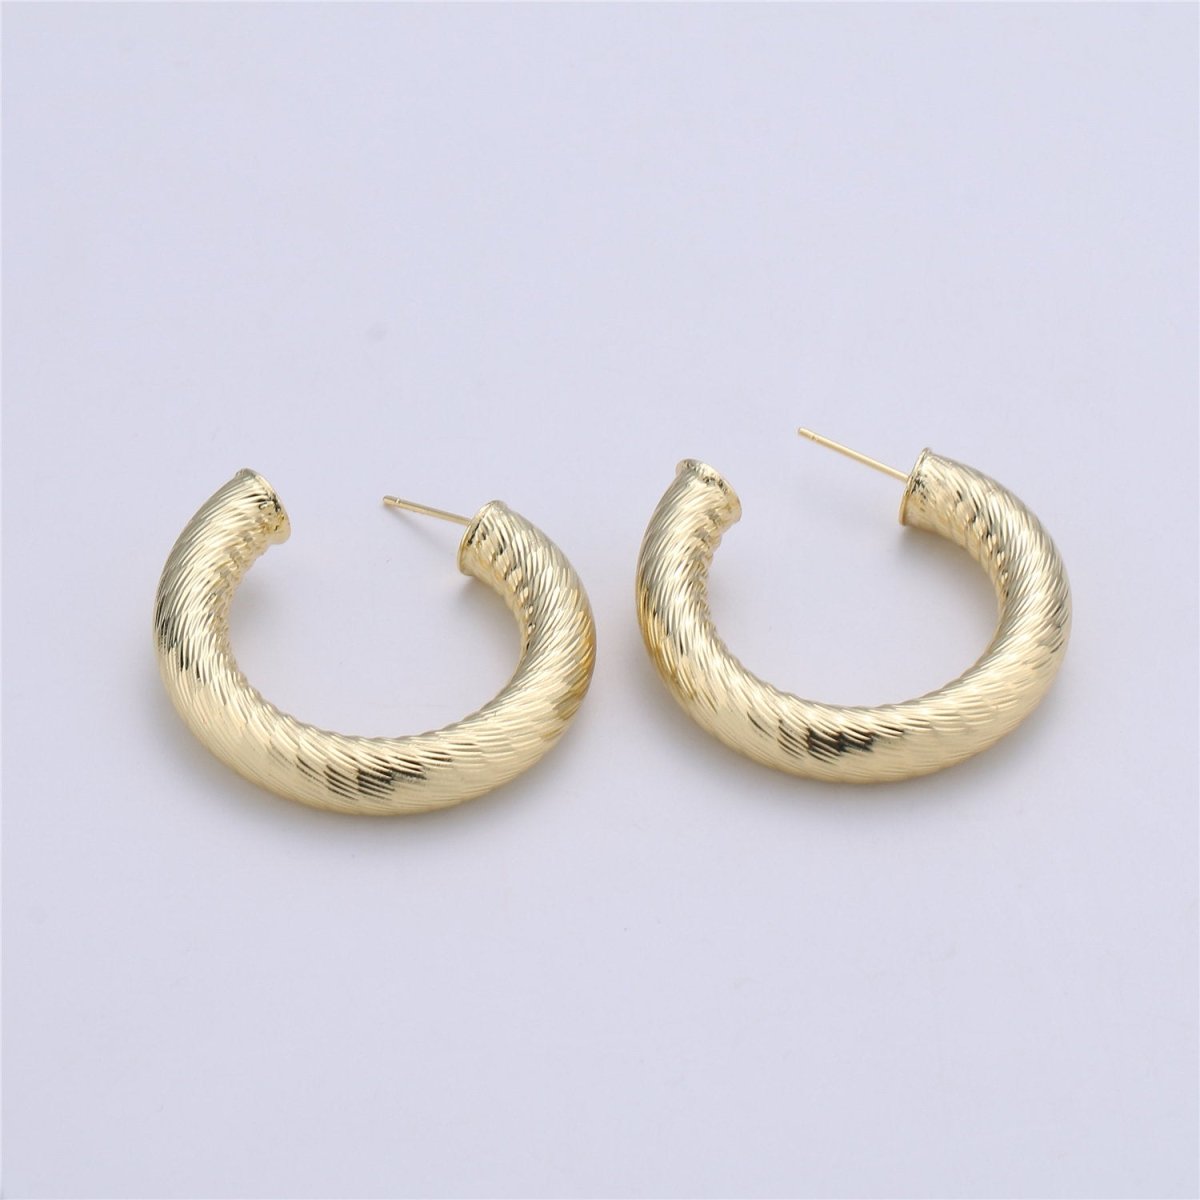 Simple Medium Thick 14k Gold Filled Hoops Earring 30mm, 40mm, 50mm 6mm thickness Q-005 Q-007 Q-009 - DLUXCA